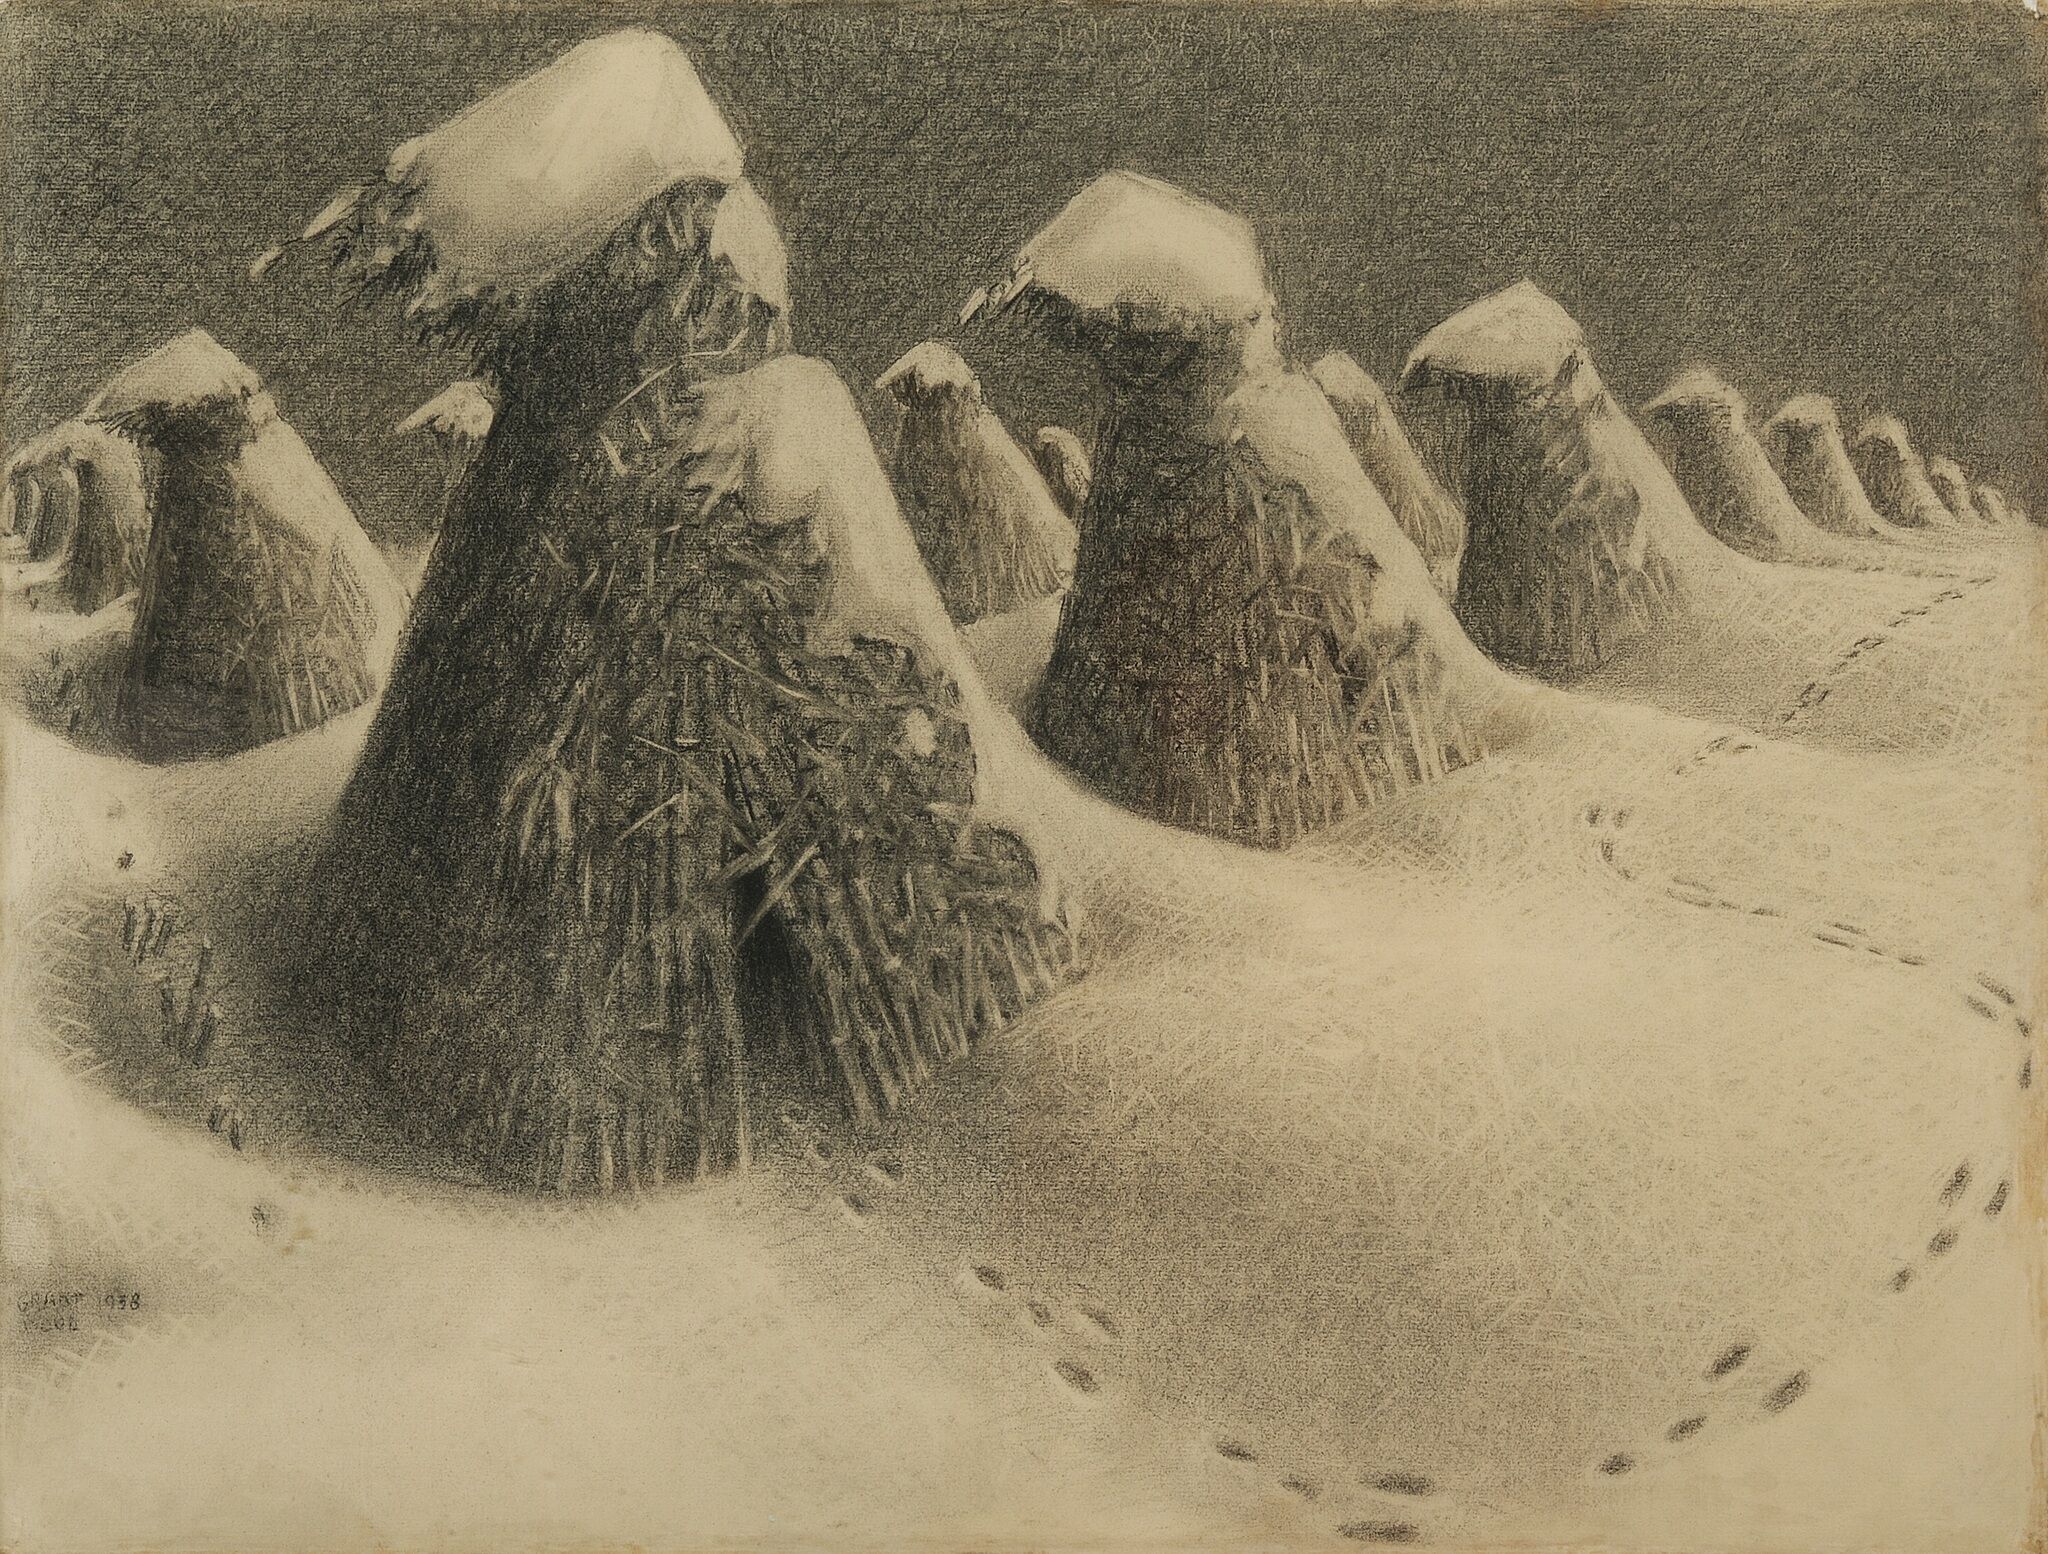 Sketch of hay structures covered in snow. 